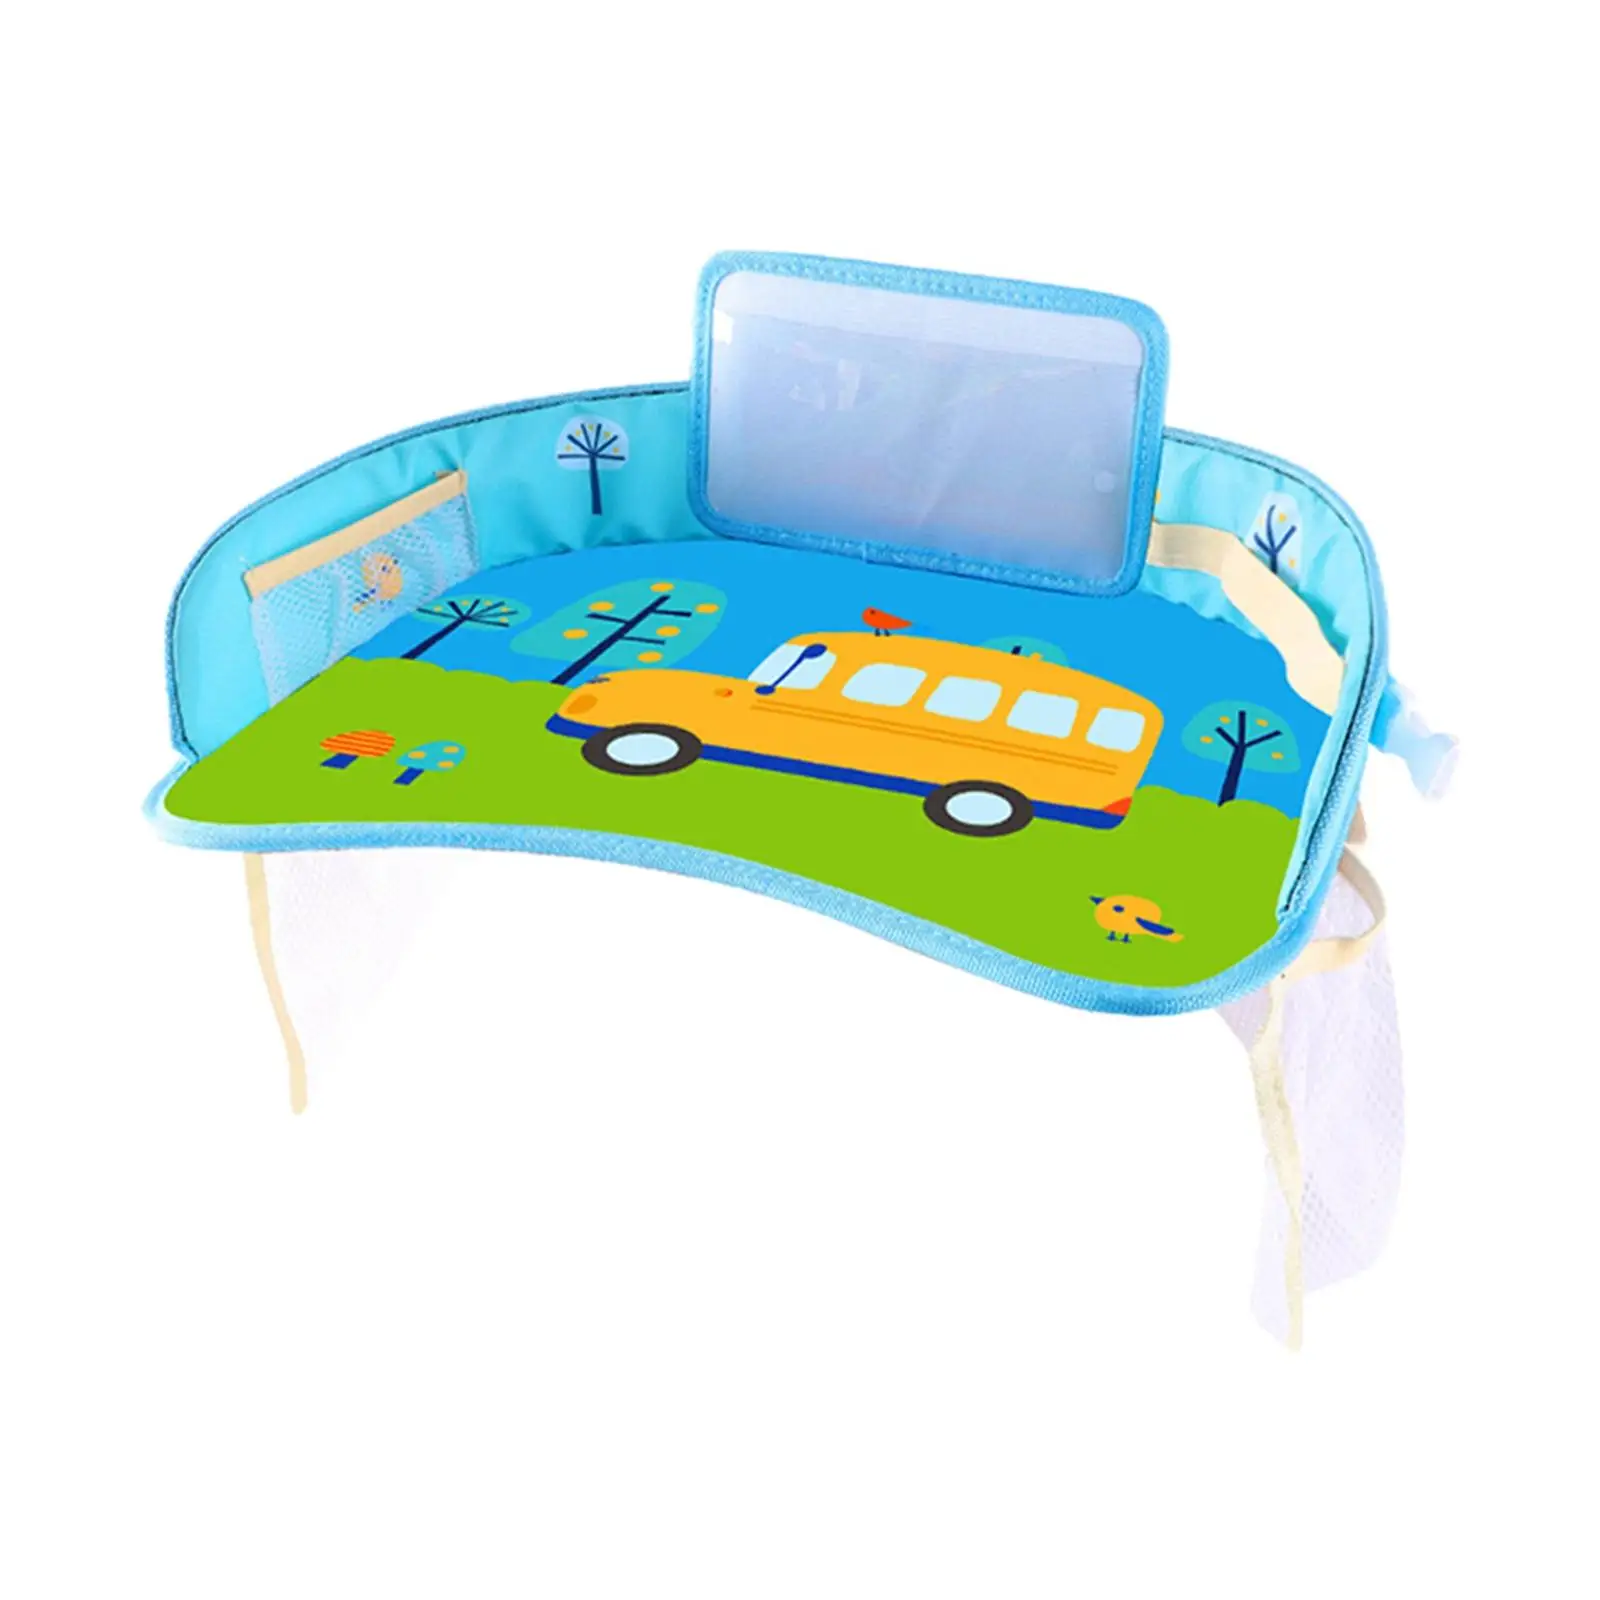 Toddler Lap Desk Organizer Eating Drawing Snack Tray Tablet Phone Holder Stand Kids Car Tray for Stroller Airplane Travel Kids